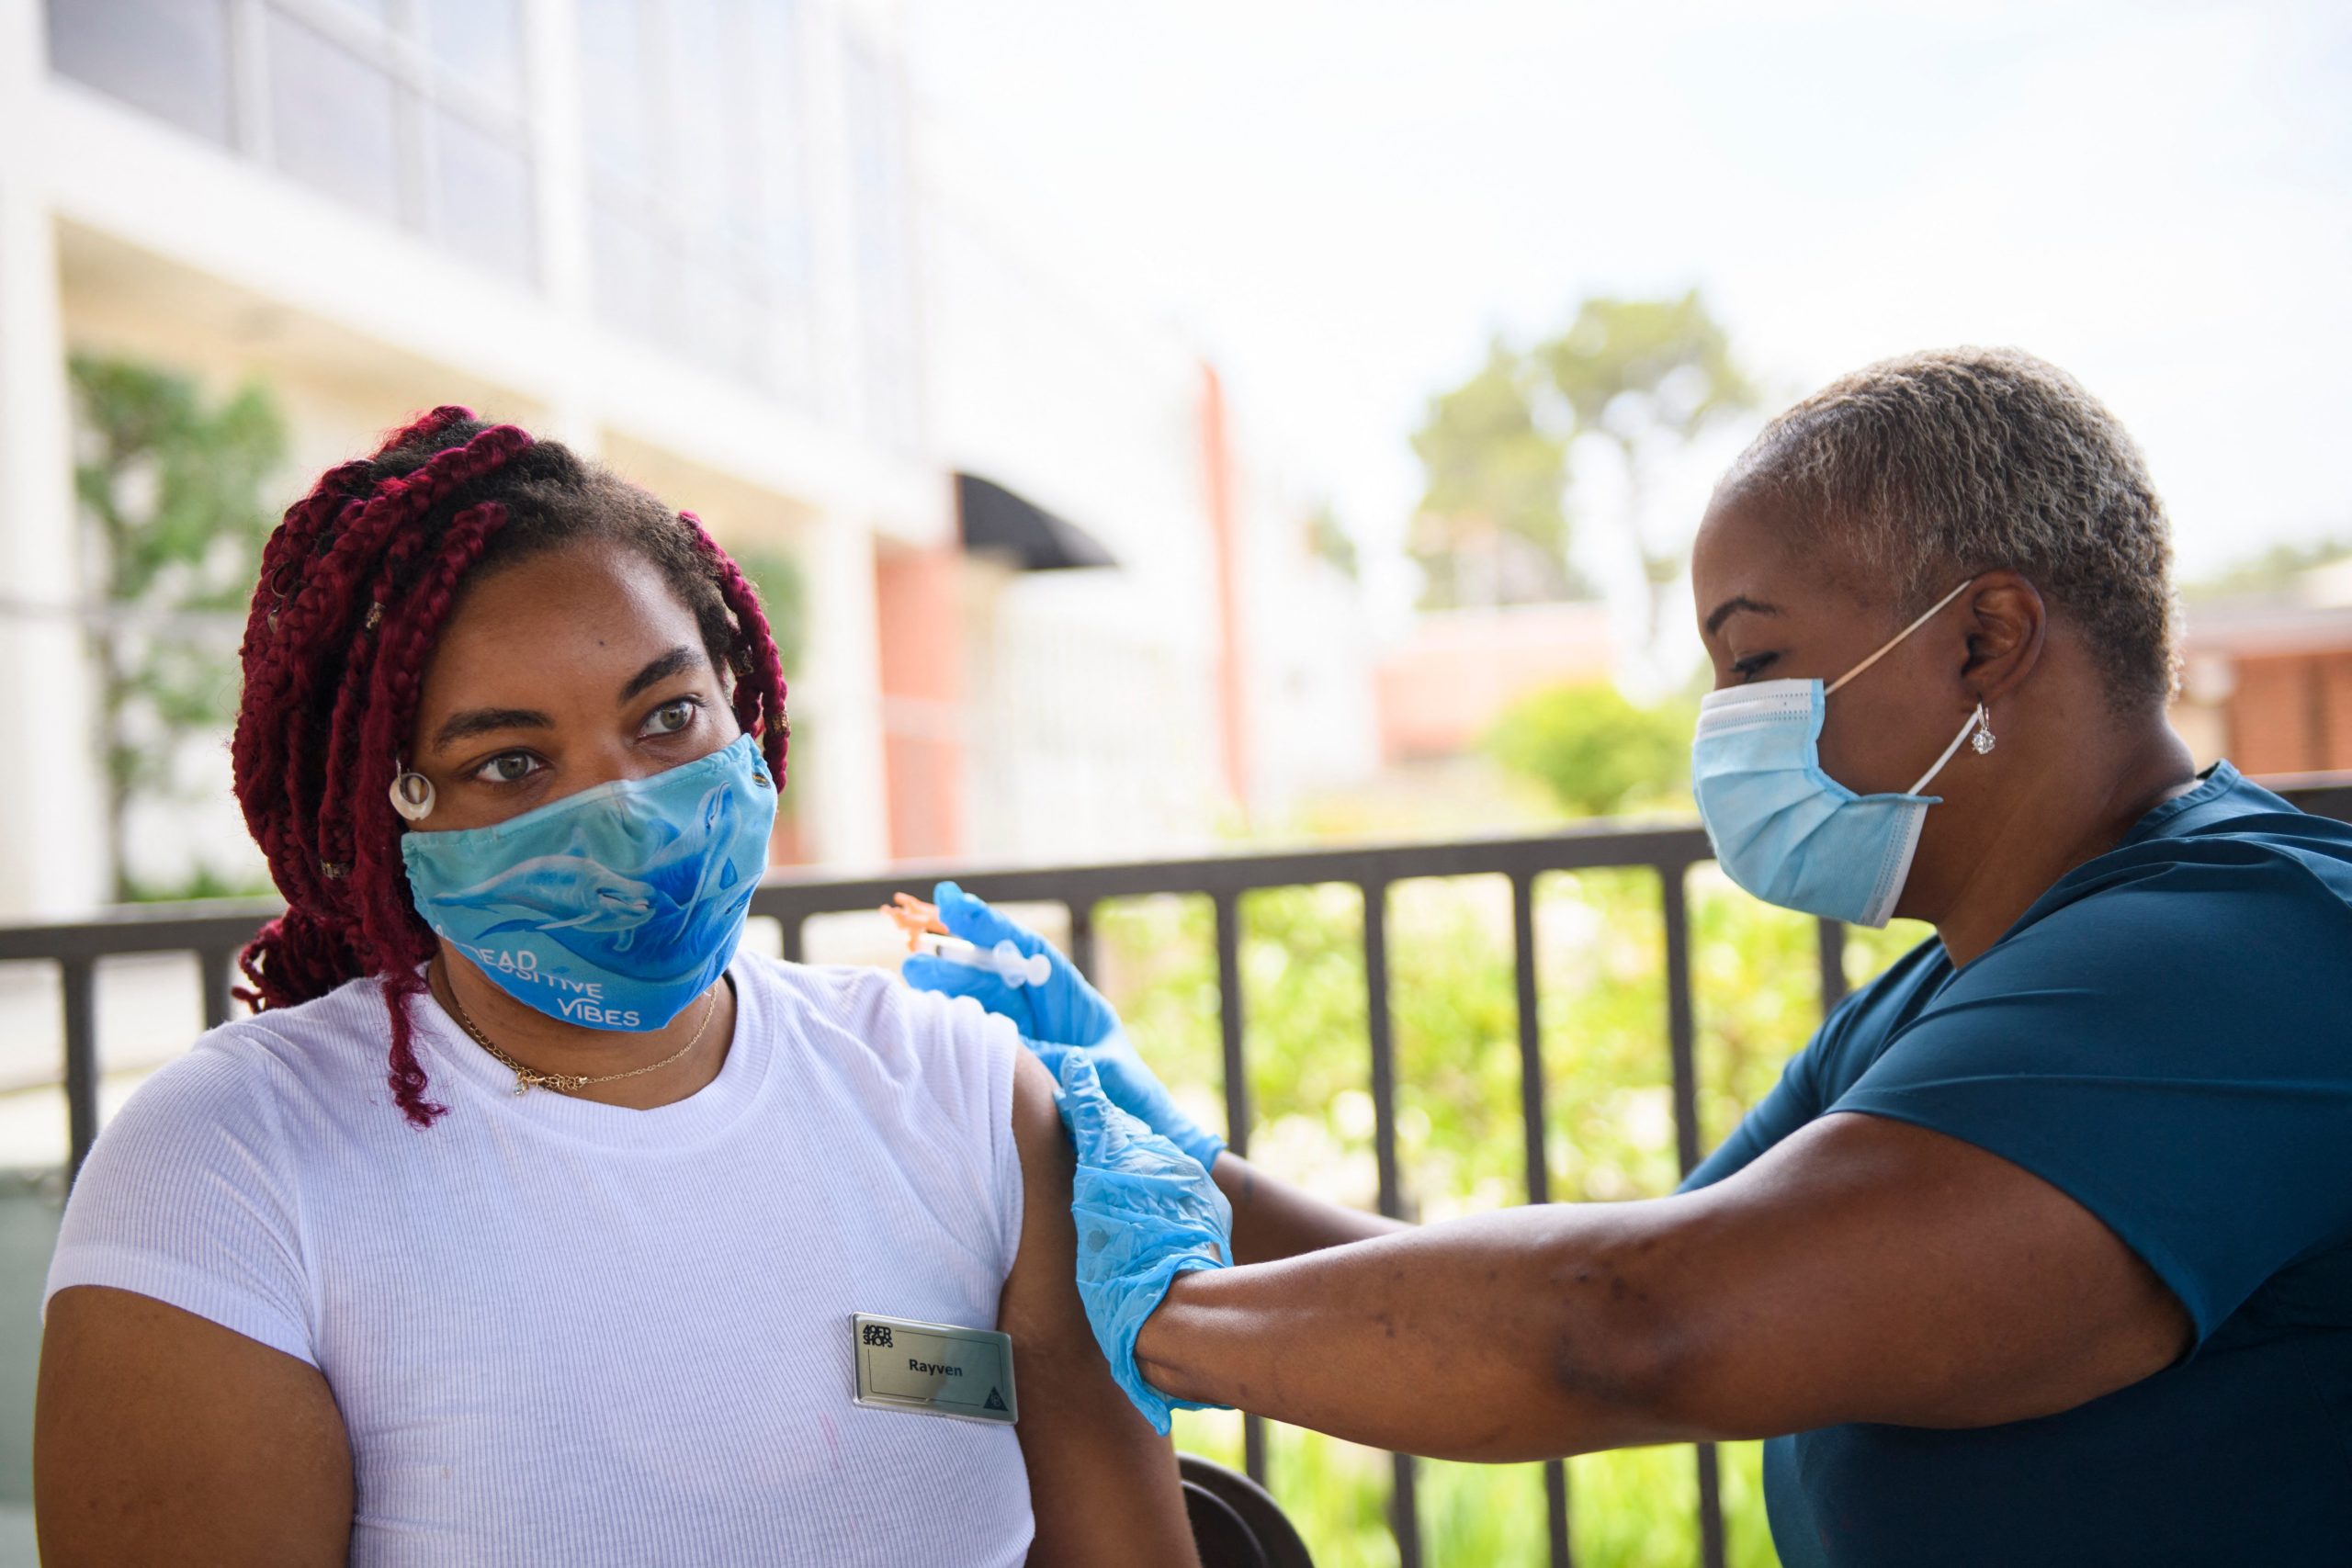 A nurse administers a dose of the Pfizer Covid-19 vaccine to a college student during a City of Long Beach Public Health Covid-19 mobile vaccination clinic at the California State University Long Beach (CSULB) campus on August 11, 2021 in Long Beach, California. (Photo by PATRICK T. FALLON/AFP via Getty Images)